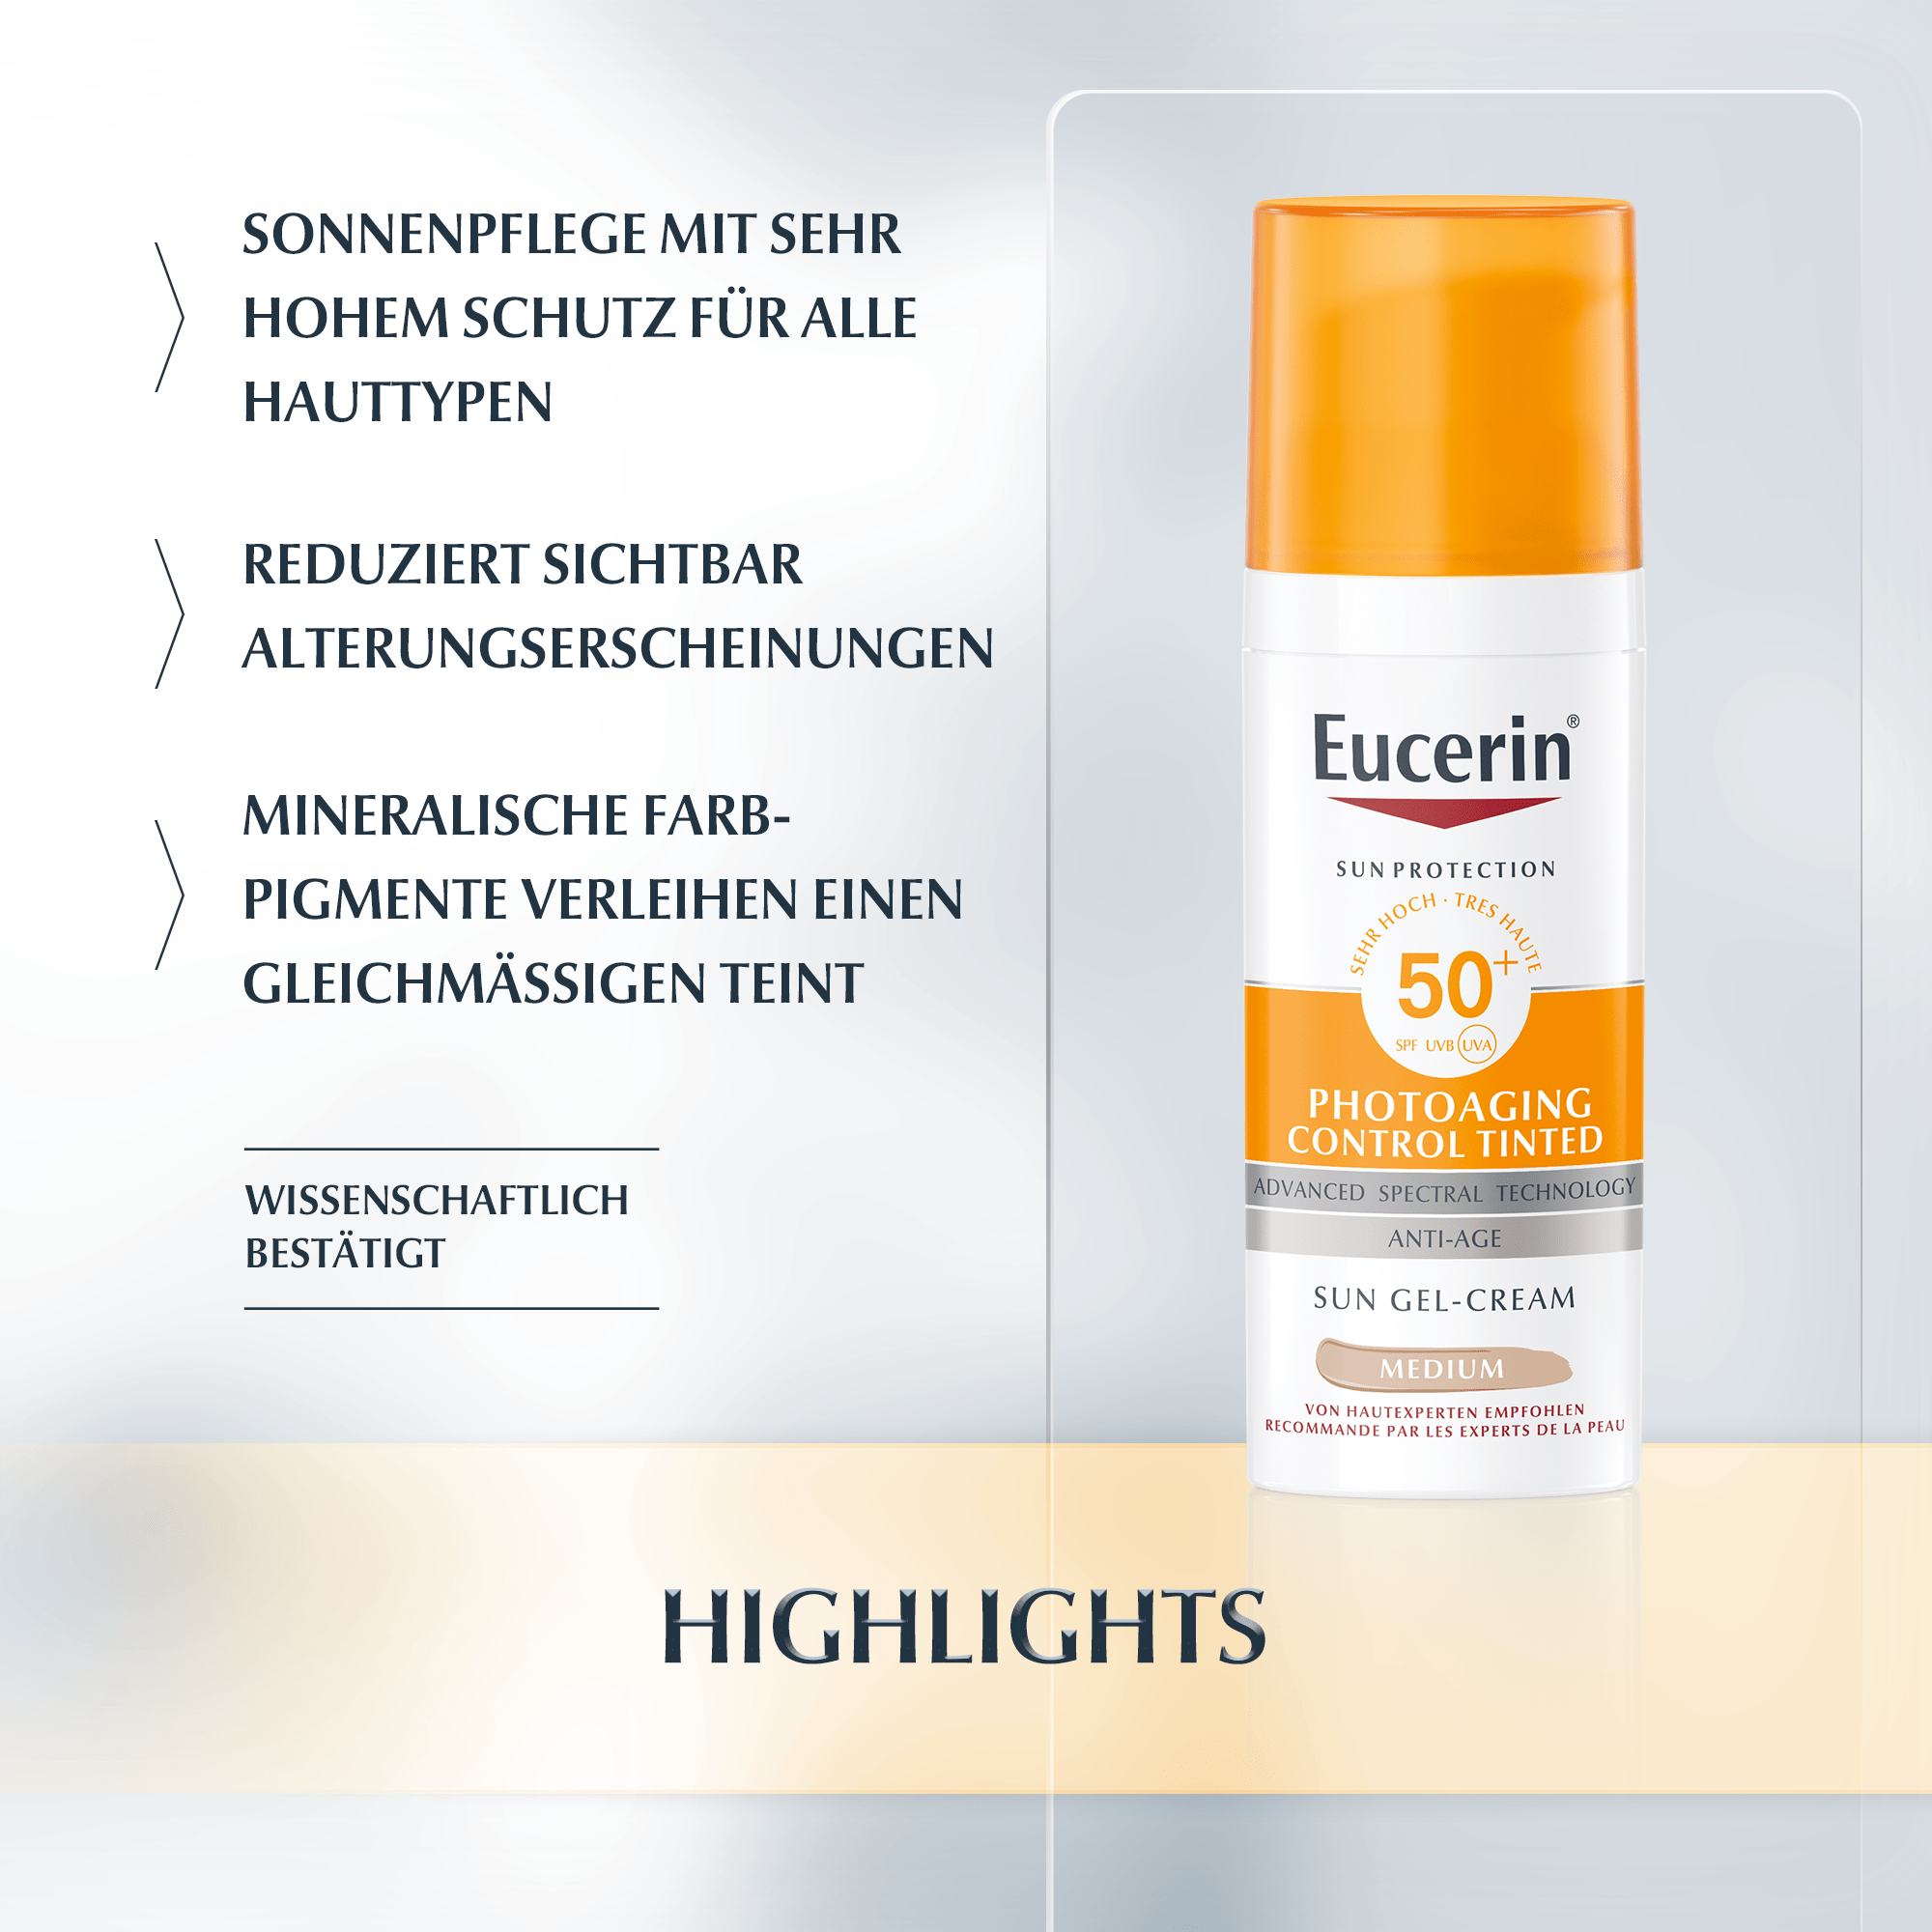 Eucerin Sun Protection Photoaging Control Tinted SPF 50+ Medium contains mineral colour pigments and hyaluronic acid. 